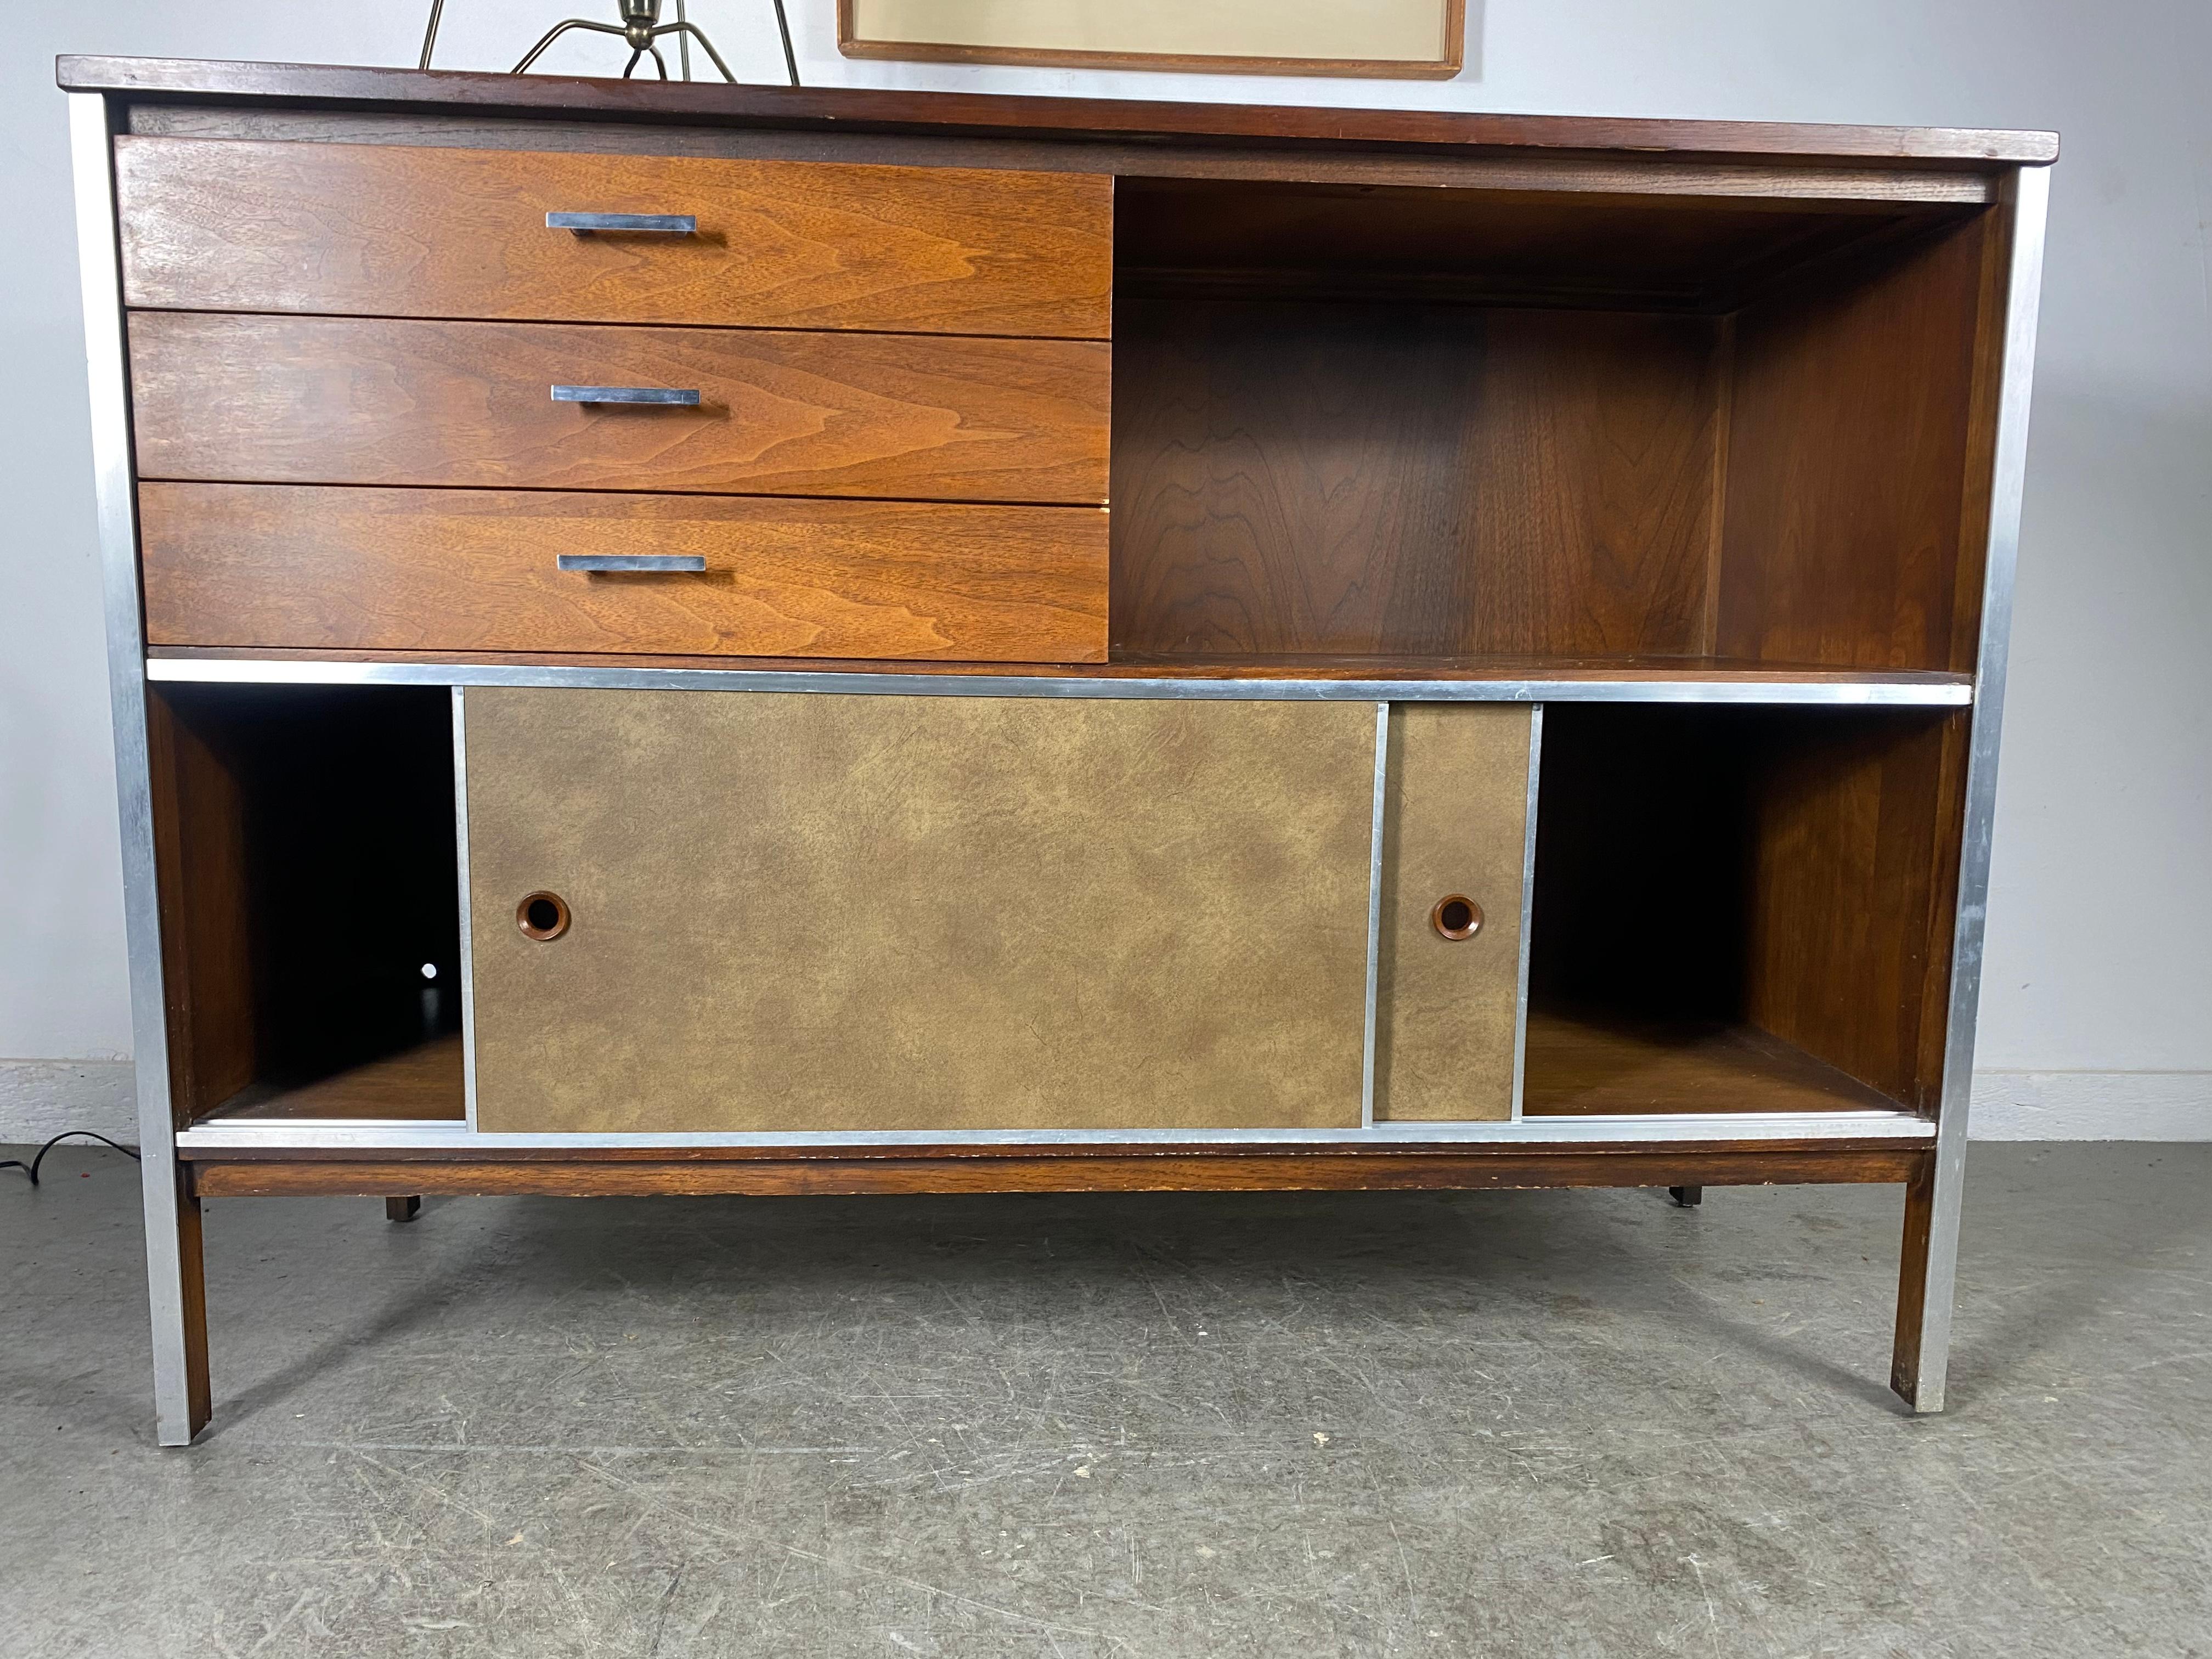 Stunning Paul McCobb Credenza for Calvin Linear Group Cabinet, Classic Modernist In Good Condition For Sale In Buffalo, NY